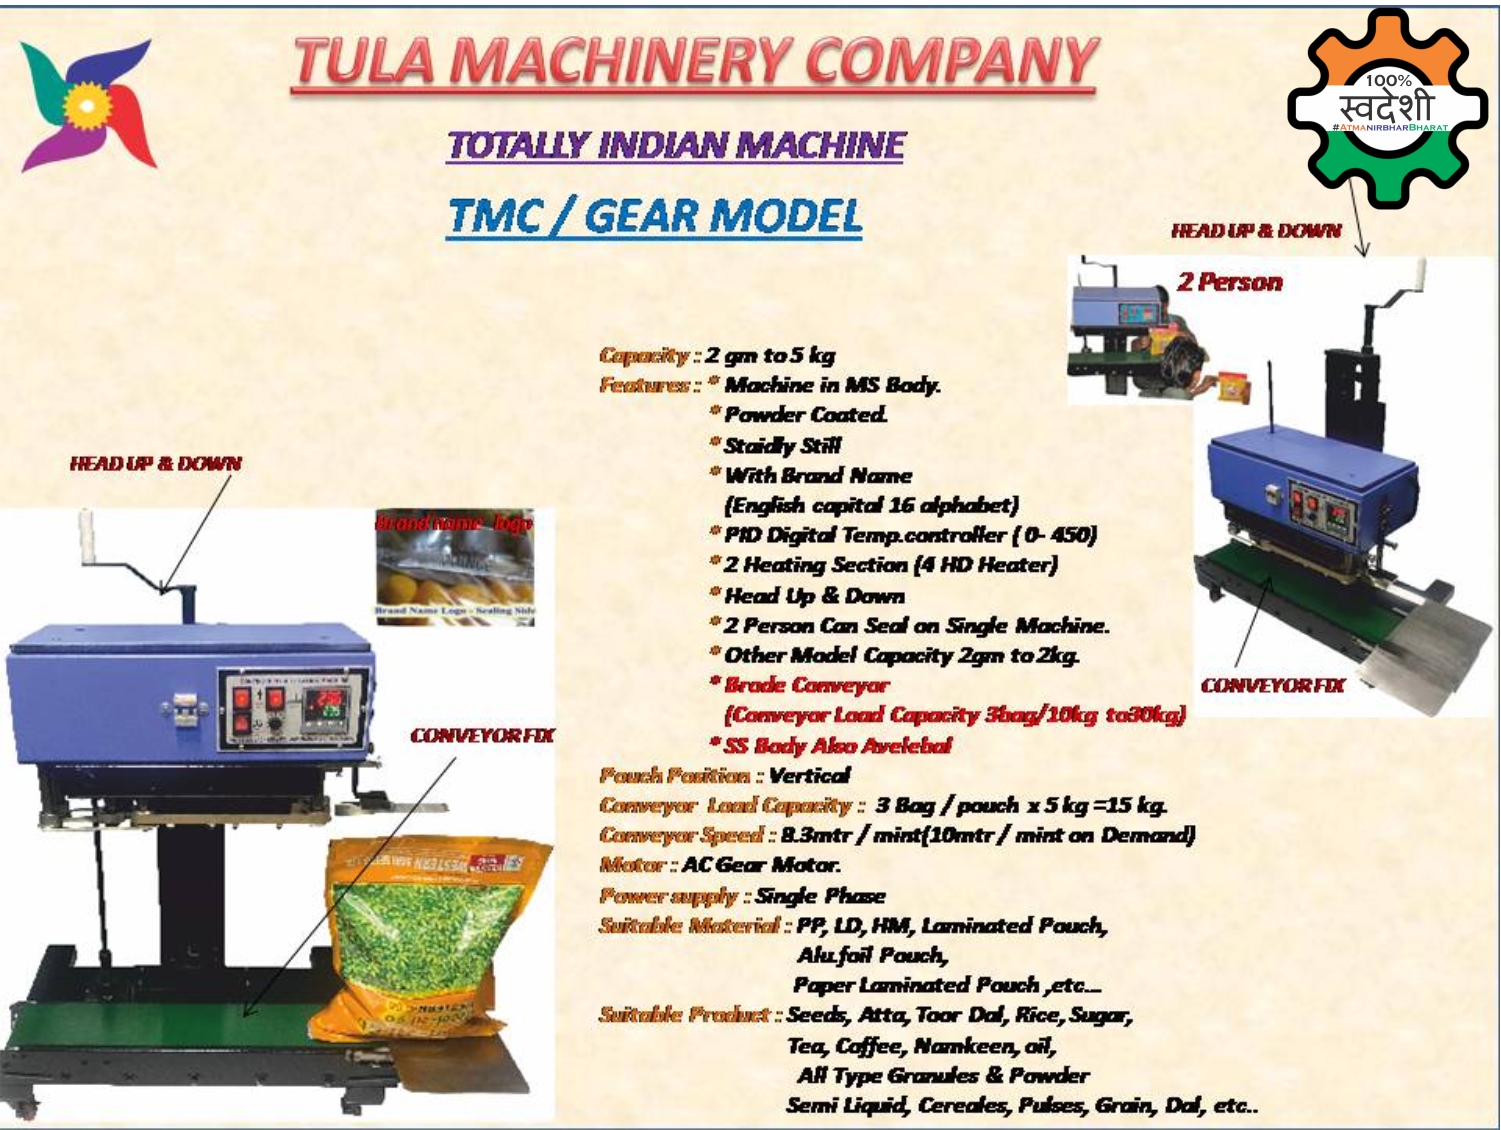 CONTINUOUS BAND SEALING MACHINE (VERTICAL GEAR MODEL)